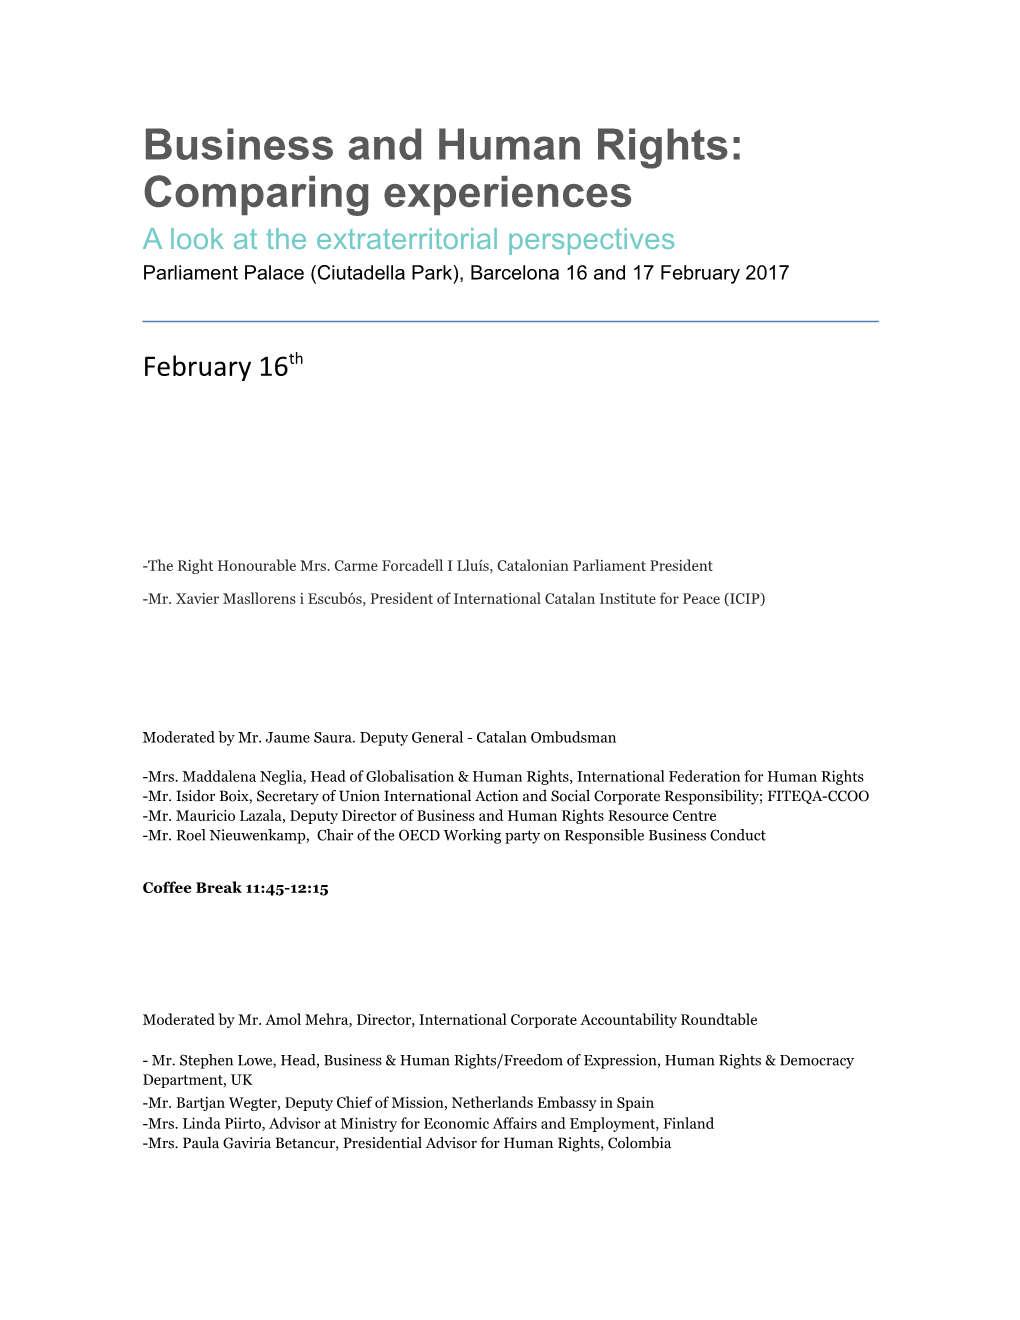 Business and Human Rights: Comparing Experiences